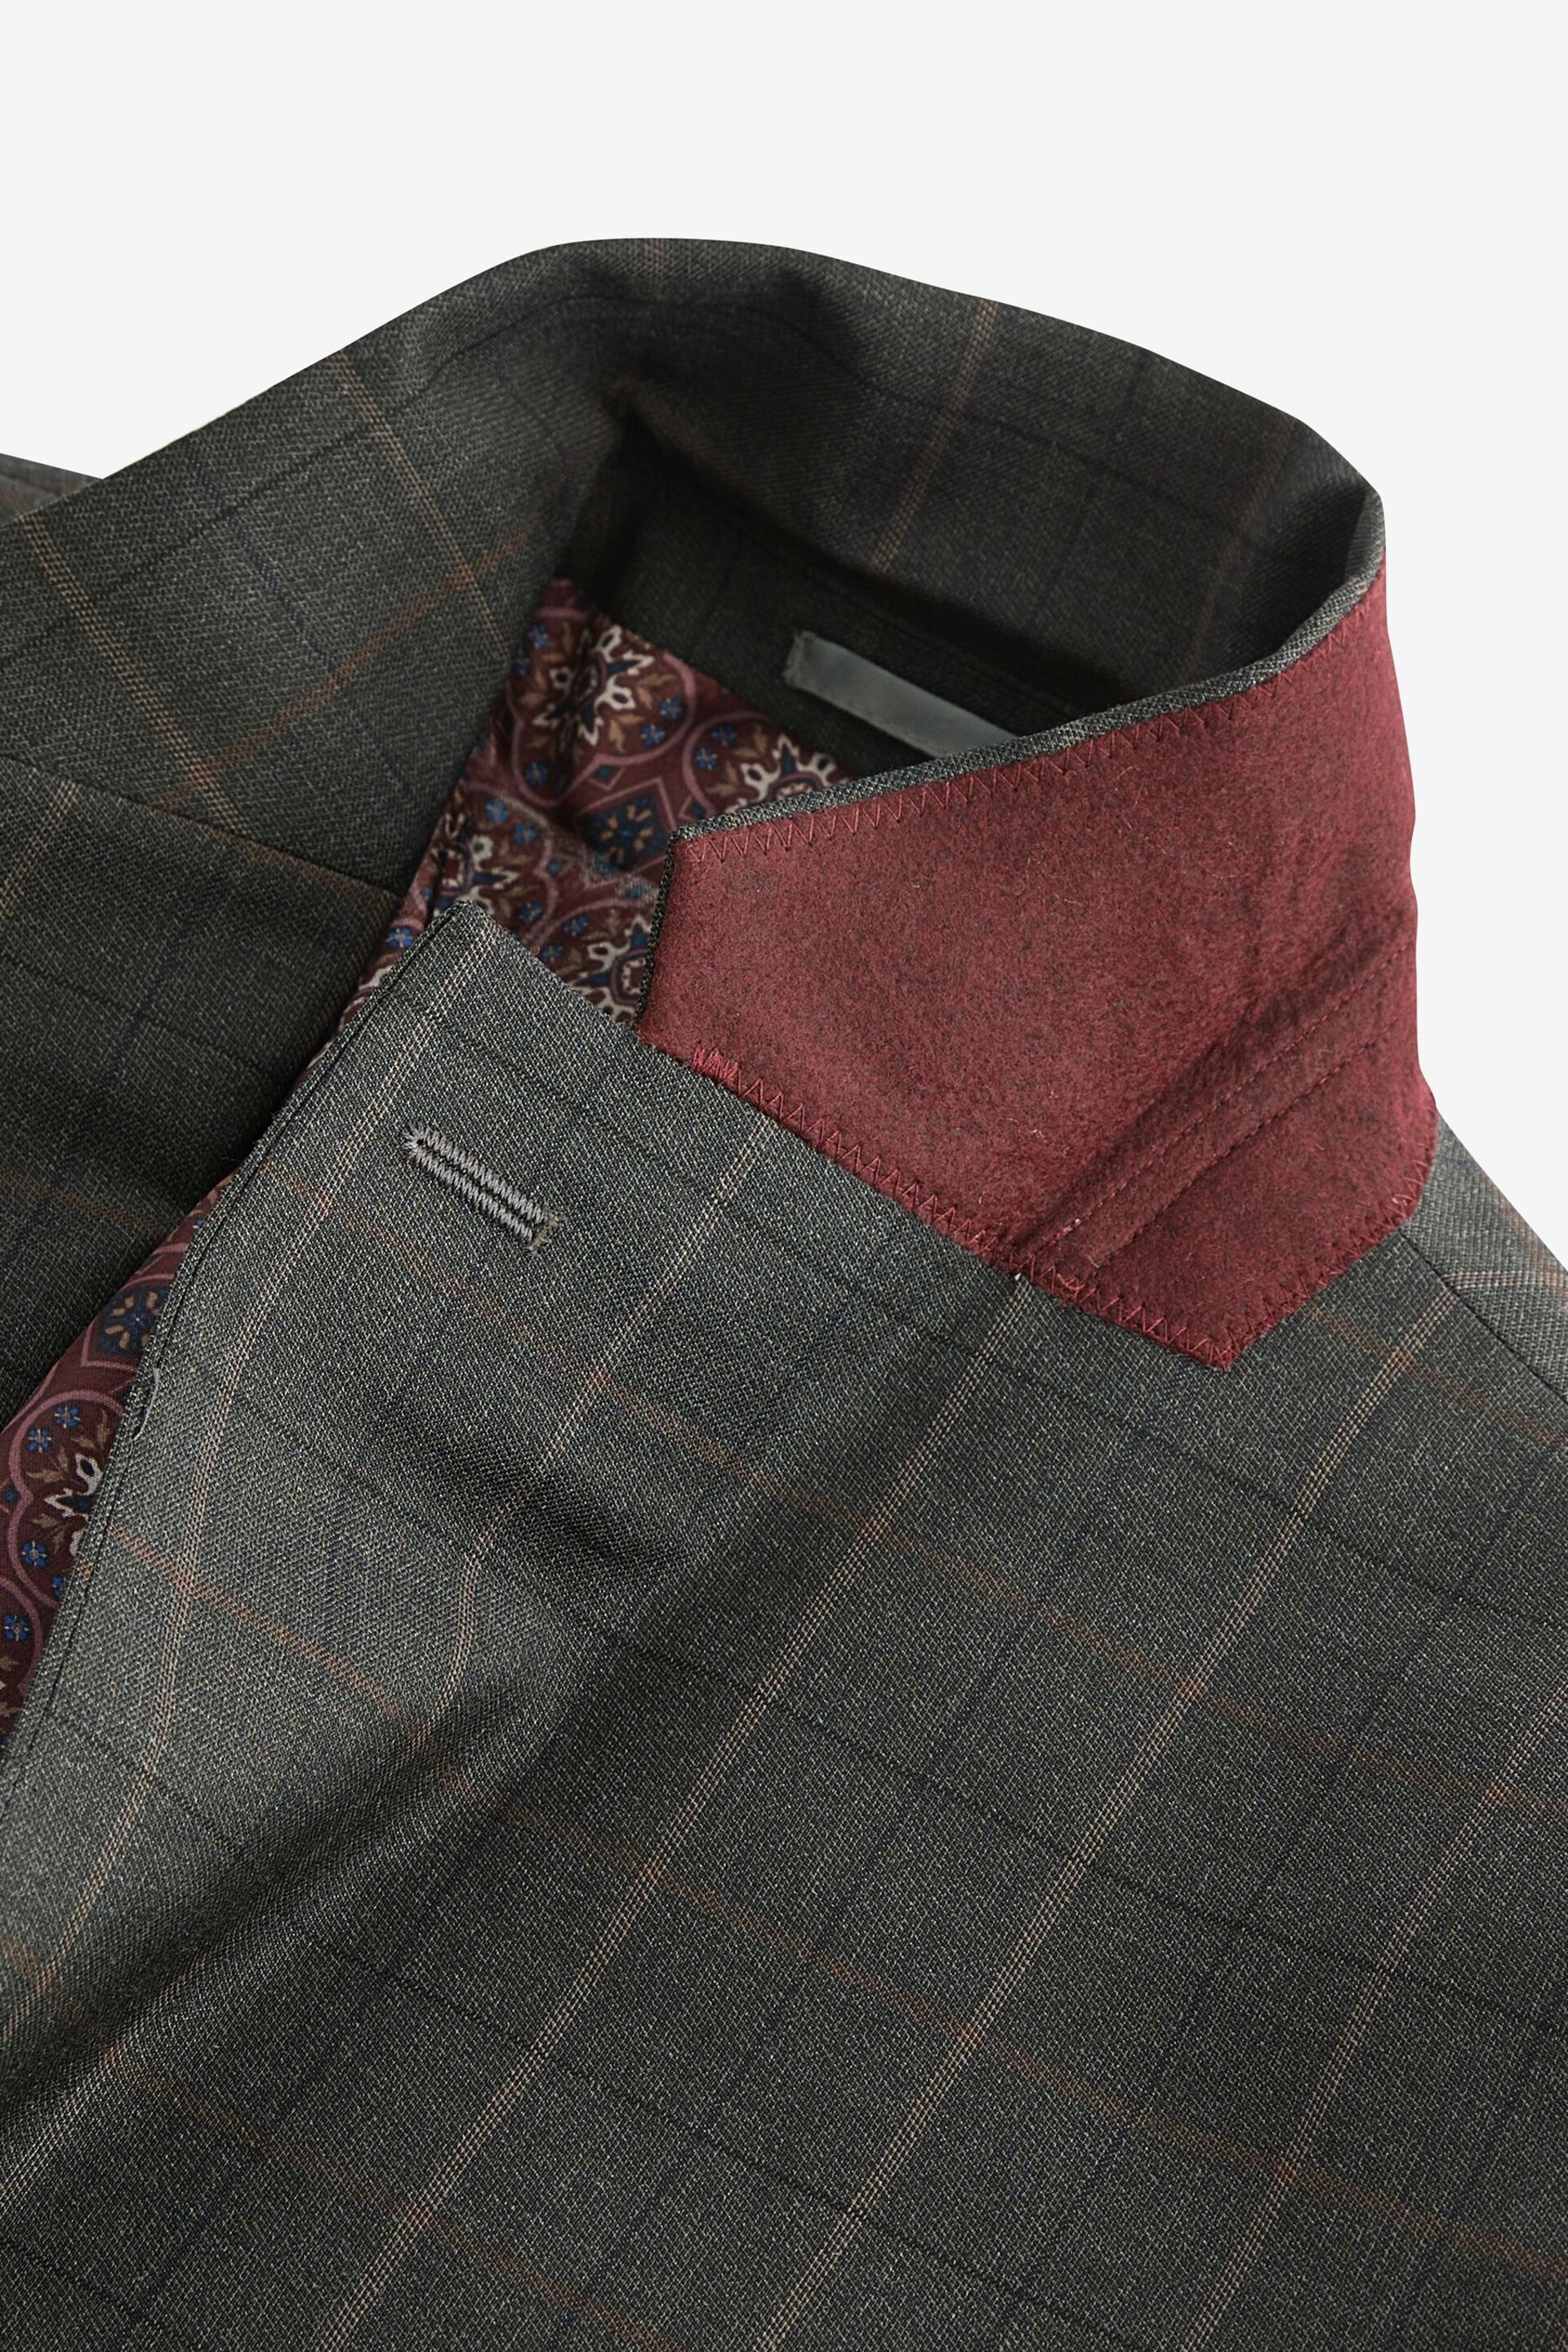 Green Tailored Fit Signature Empire Mills British Fabric Check Suit Jacket - Image 10 of 11